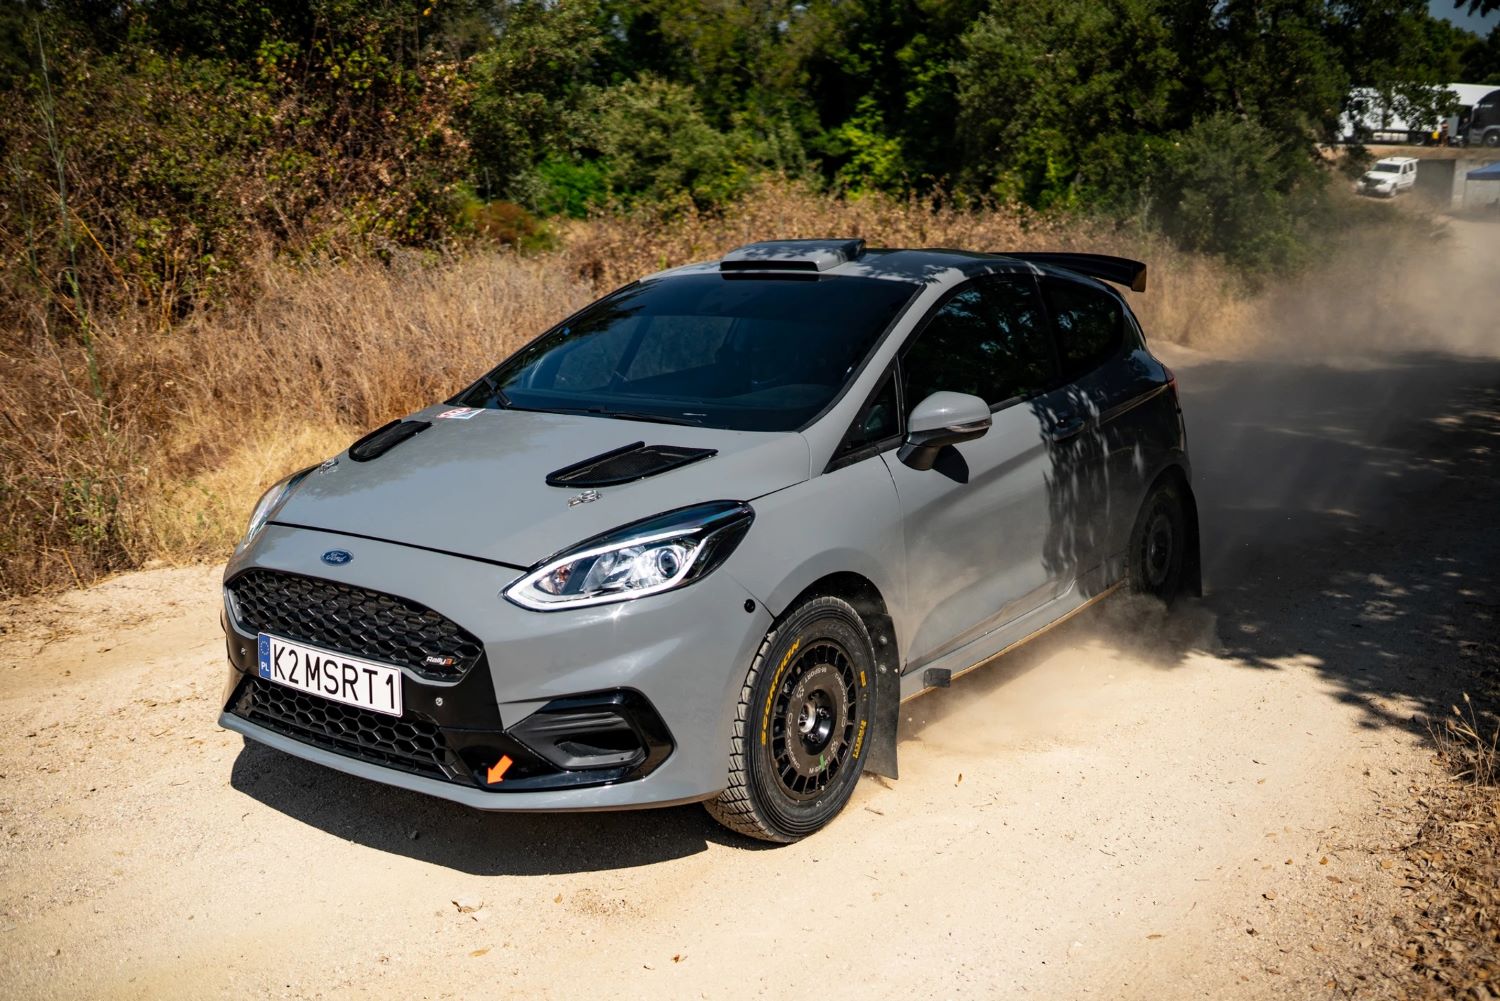 https://fordauthority.com/wp-content/uploads/2020/11/M-Sport-Ford-Fiesta-Rally3-Racer-Exterior-002-Front-Three-Quarters.jpg